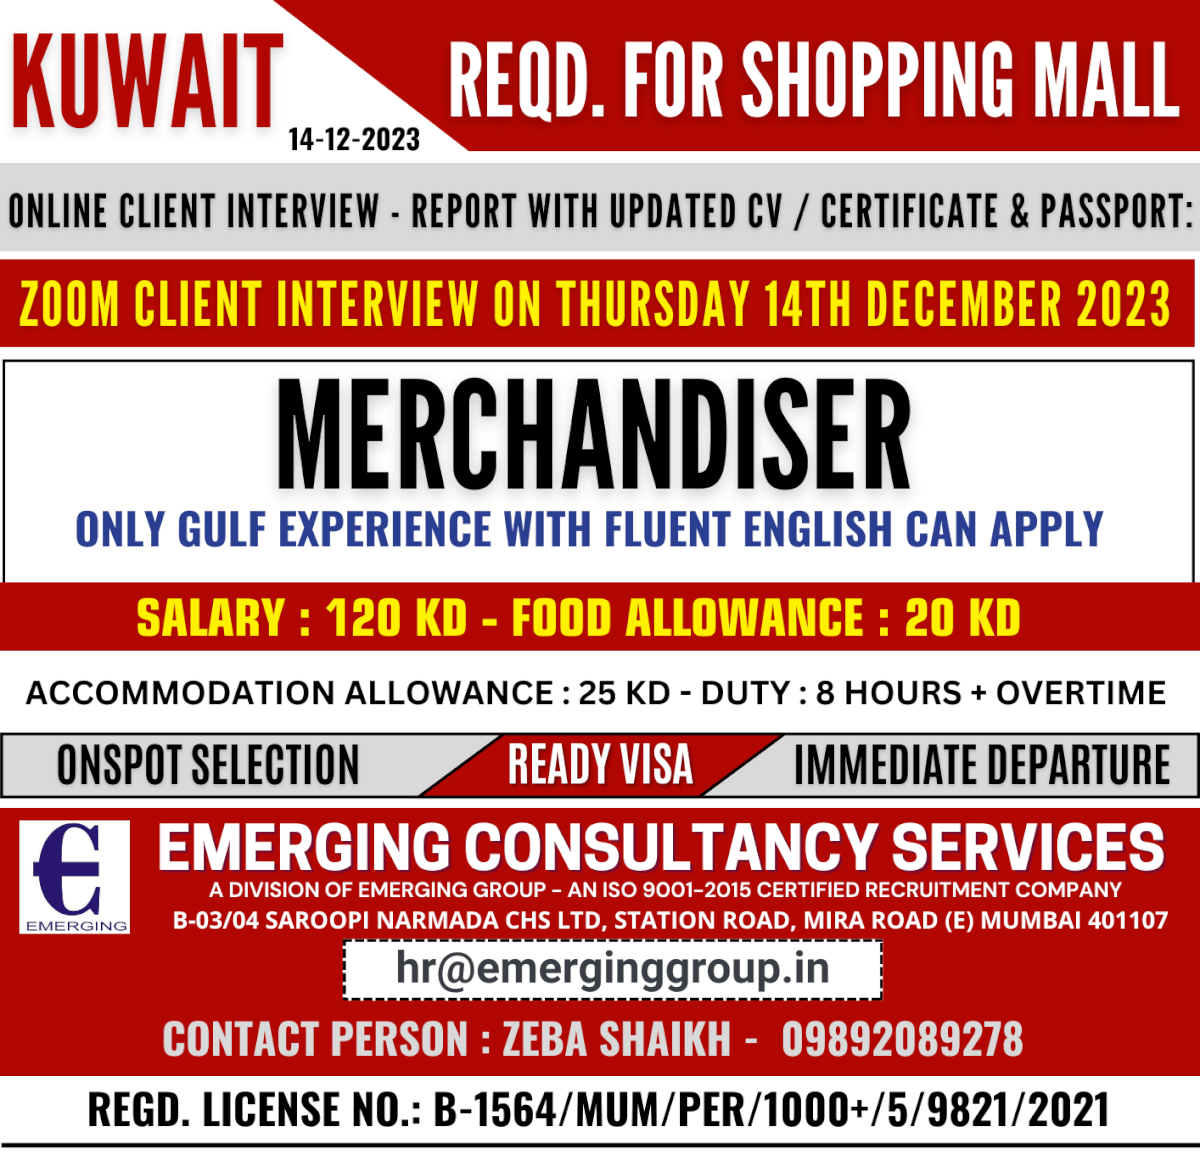 MERCHANDISER - REQUIRED FOR SHOPPING MALL